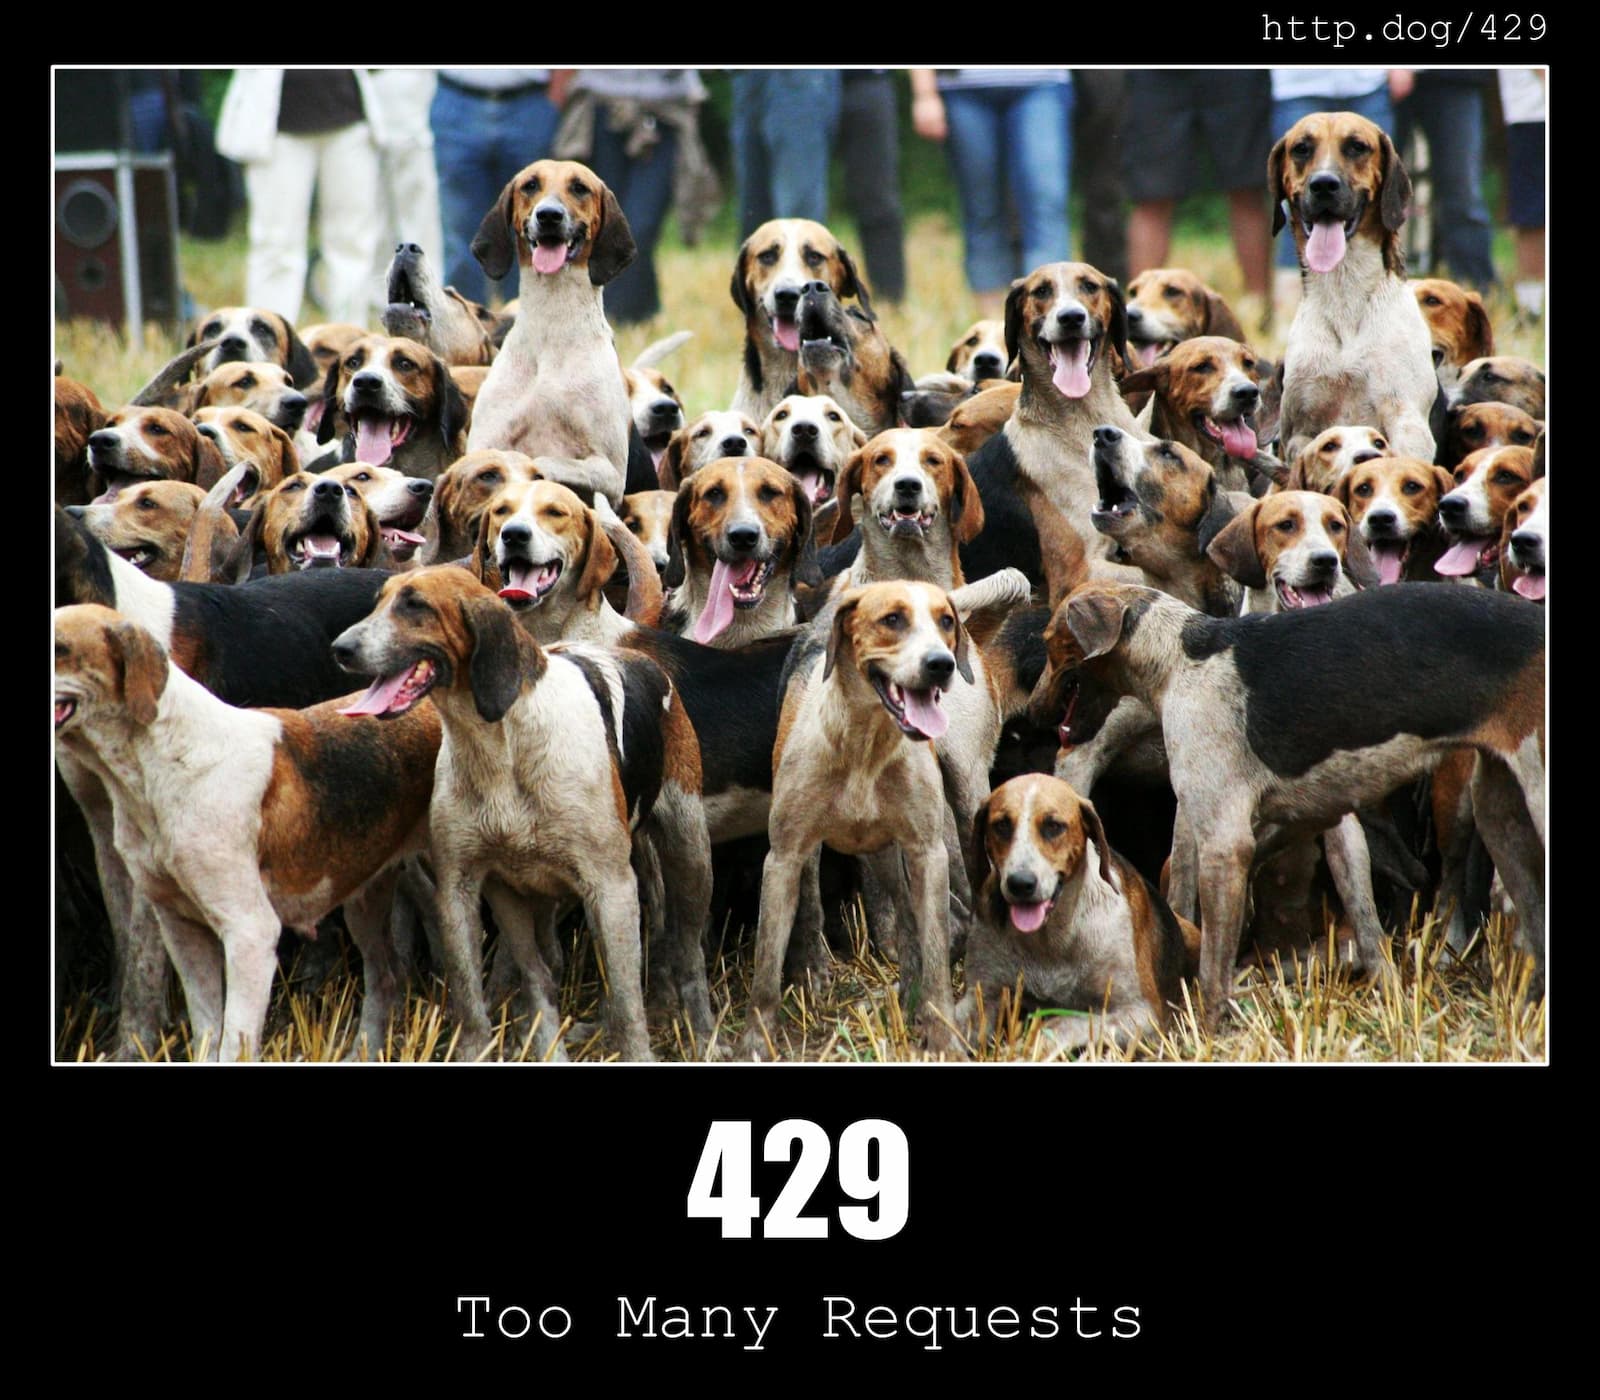 429 Too Many Requests - HTTP status code and dogs!